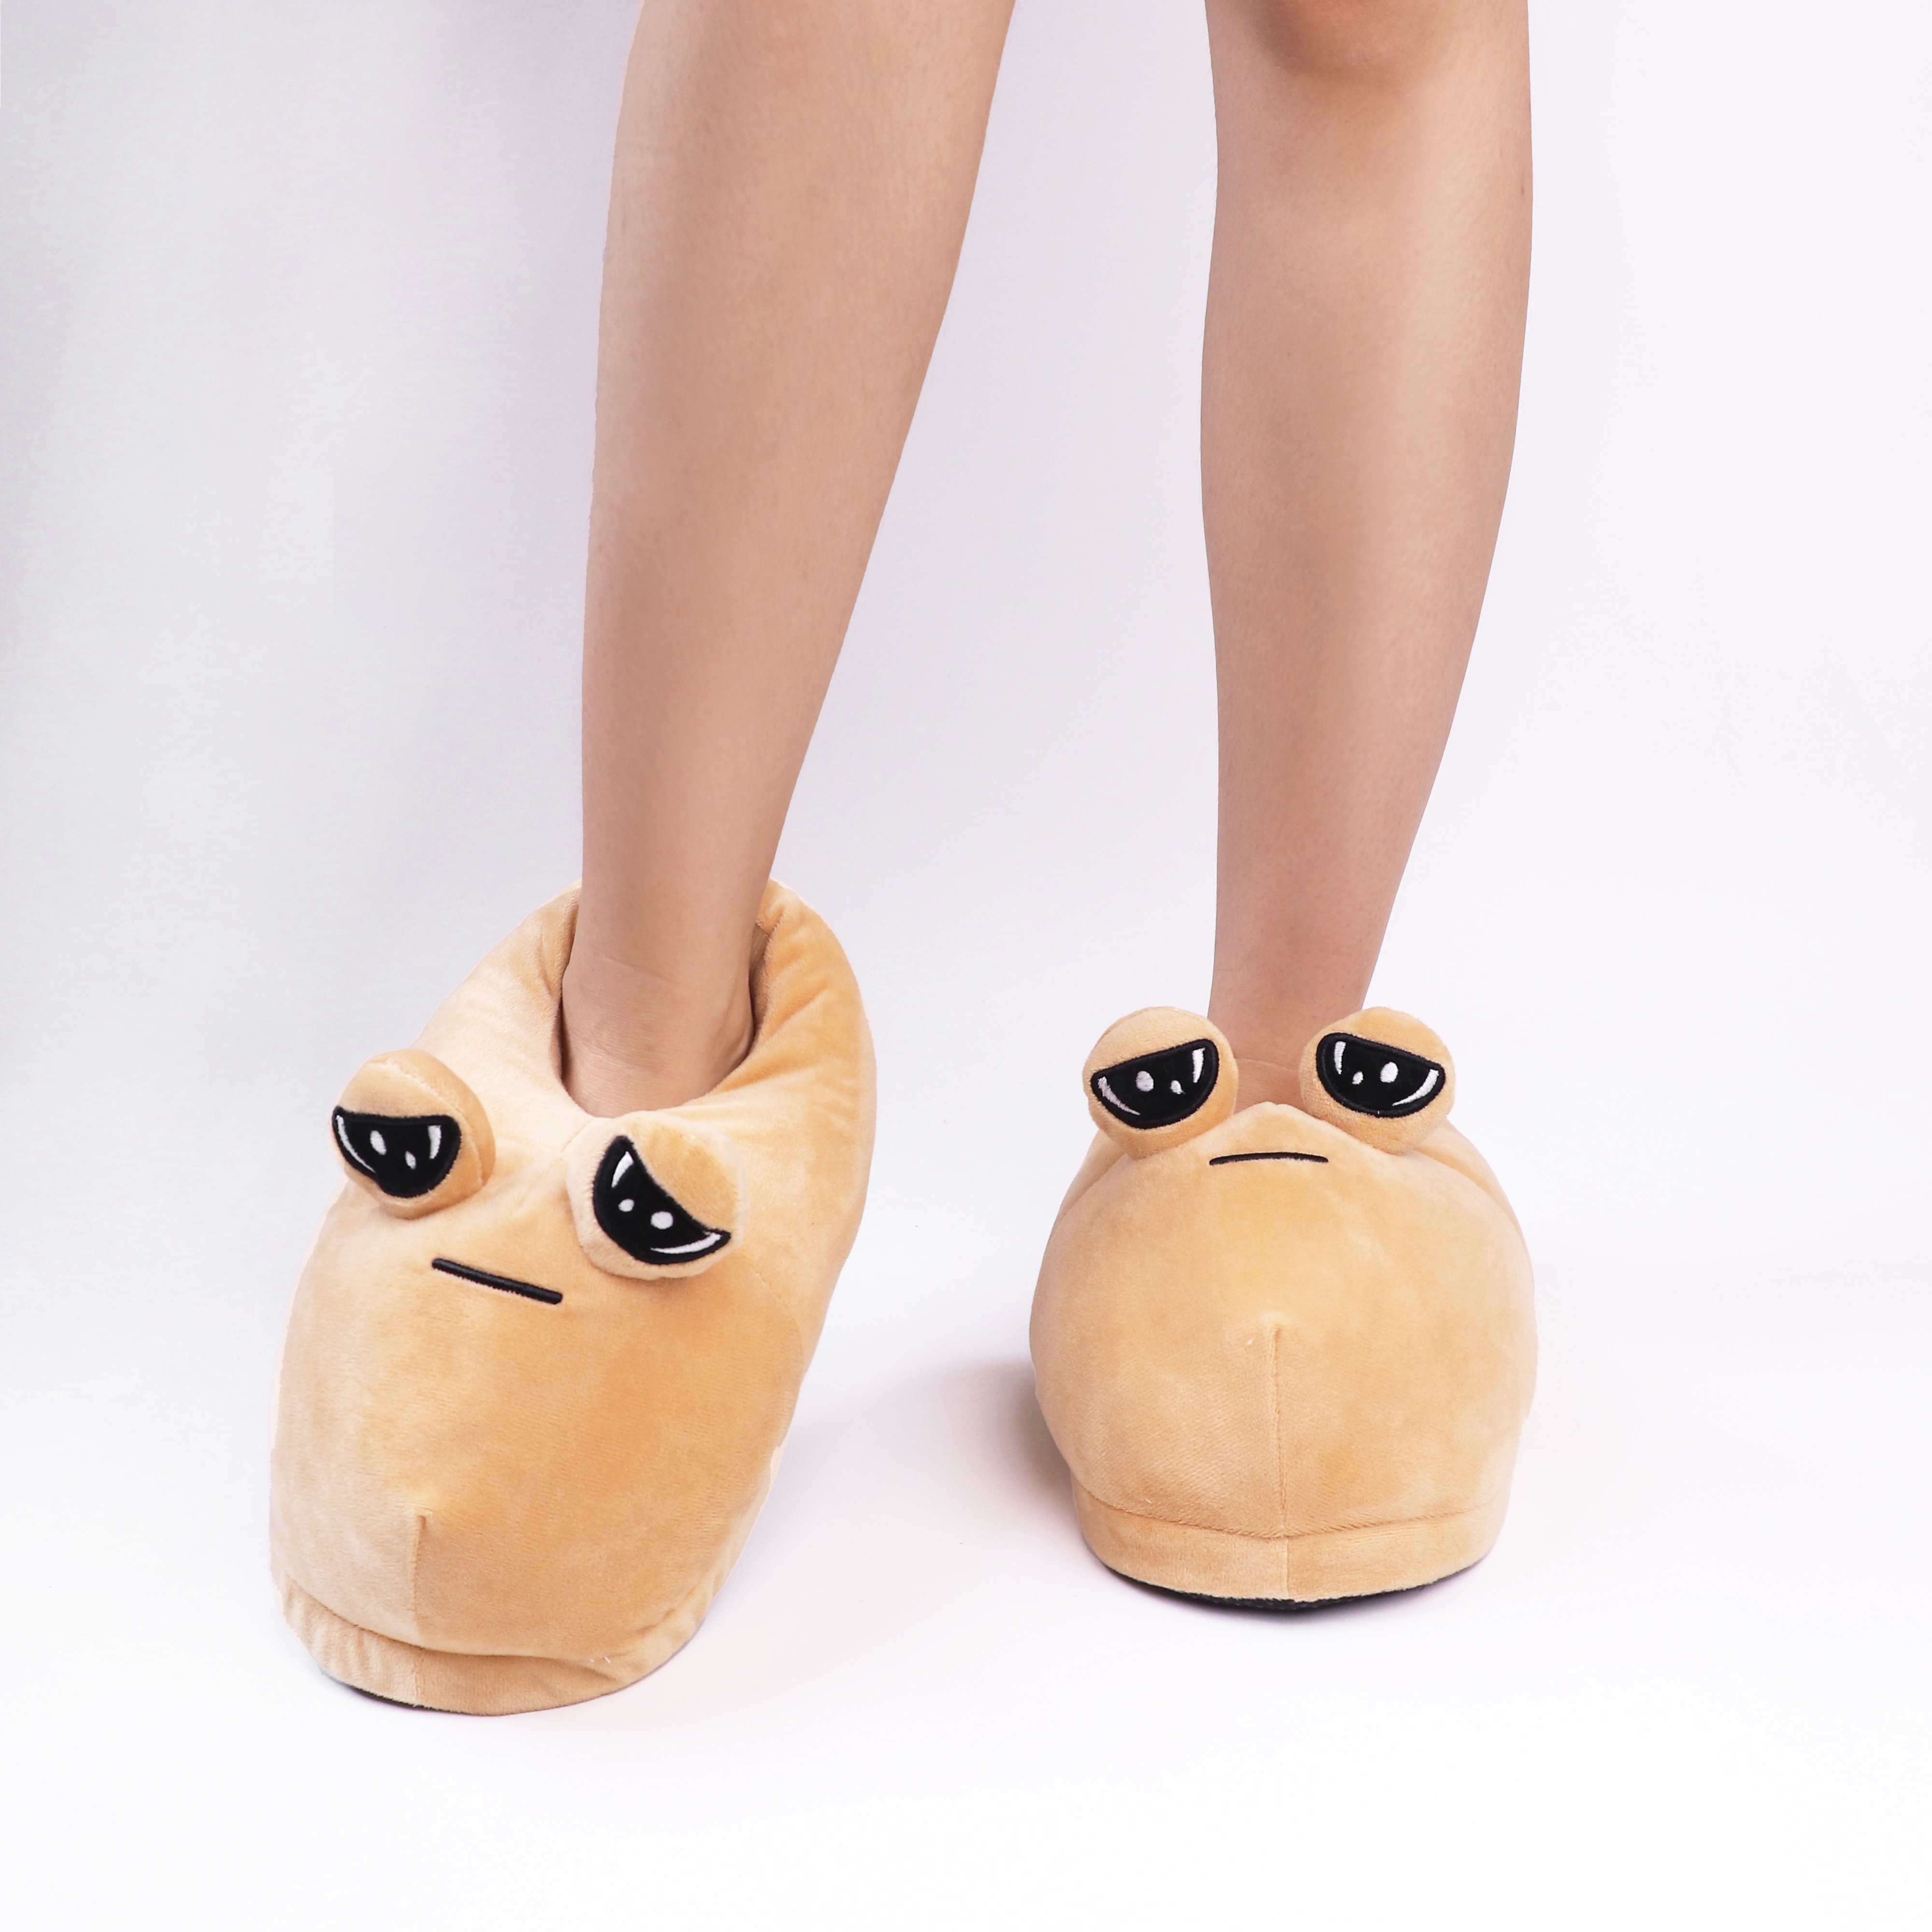 

Cute Cartoon Alien Design Slippers, Casual Slip On Plush Shoes, Comfortable Indoor Home Slippers